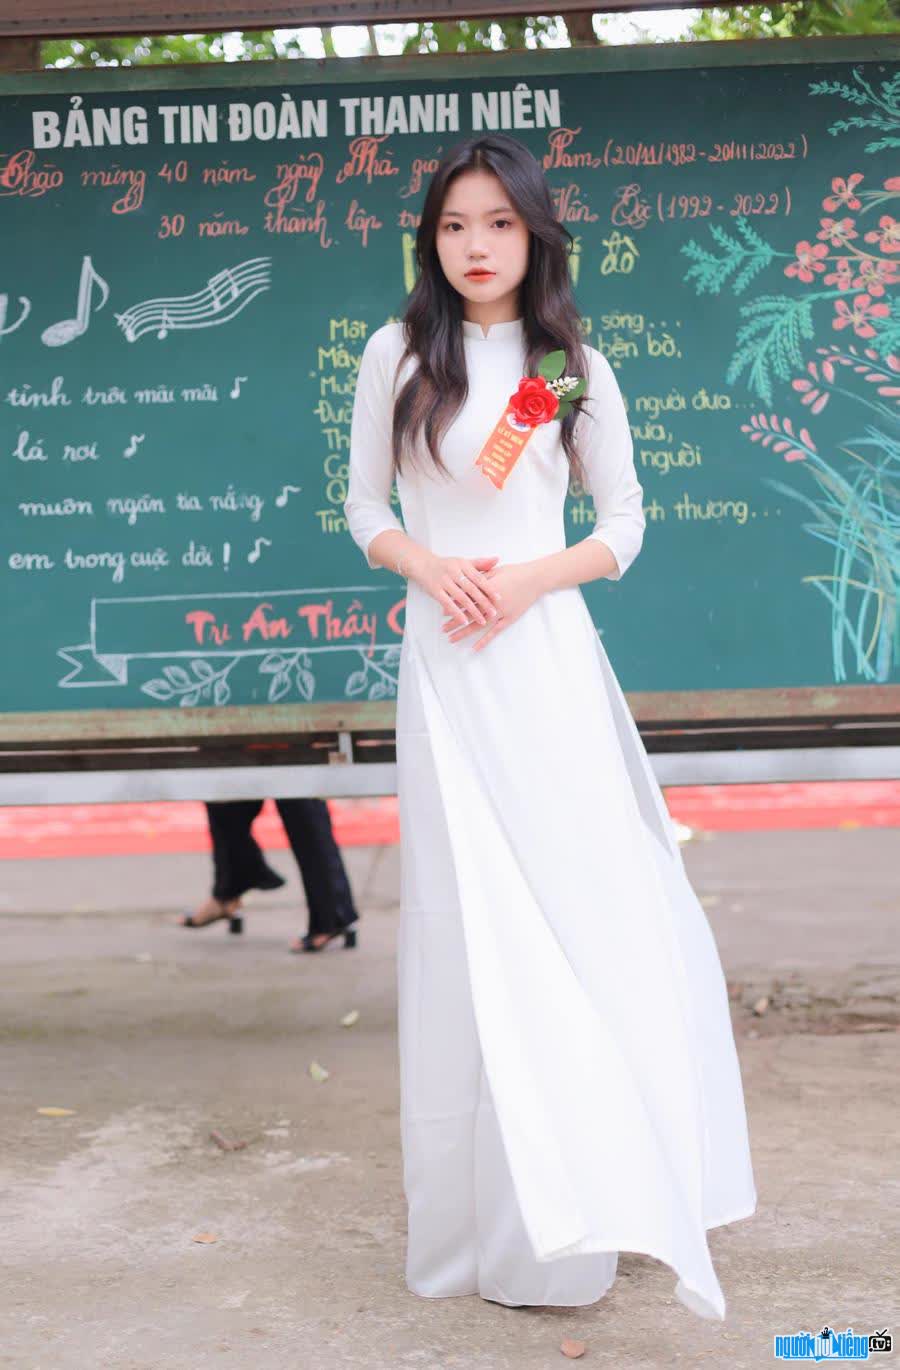 Vu Ngoc Khanh Ly is currently a high school student